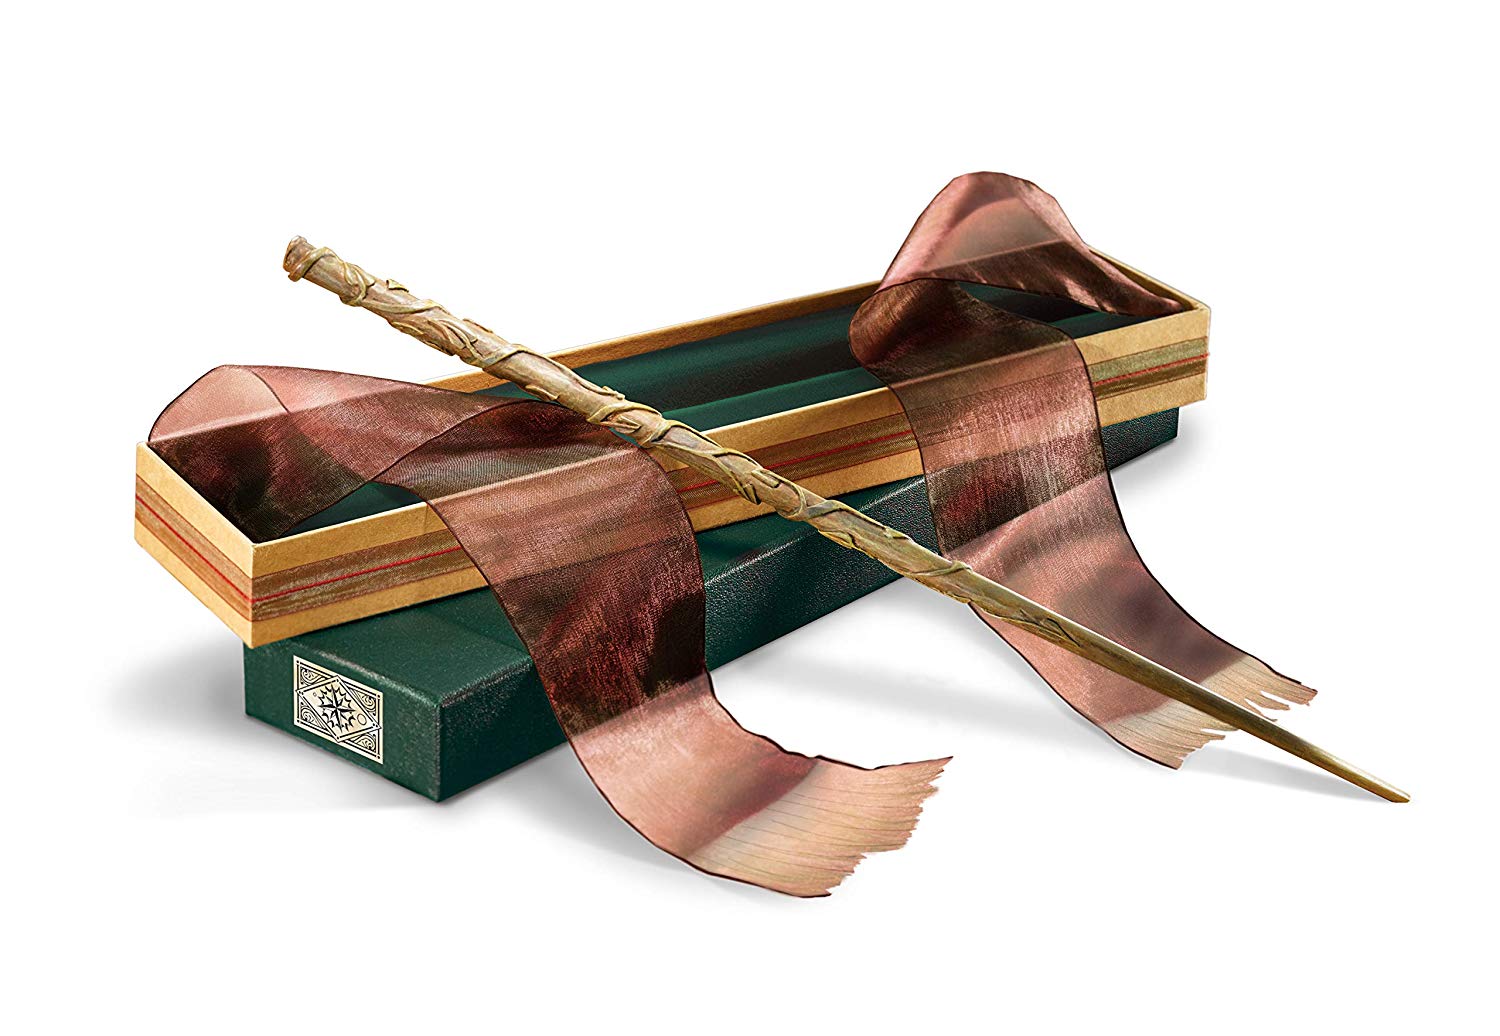 Hermione Granger's Wand with Ollivanders Wand Box